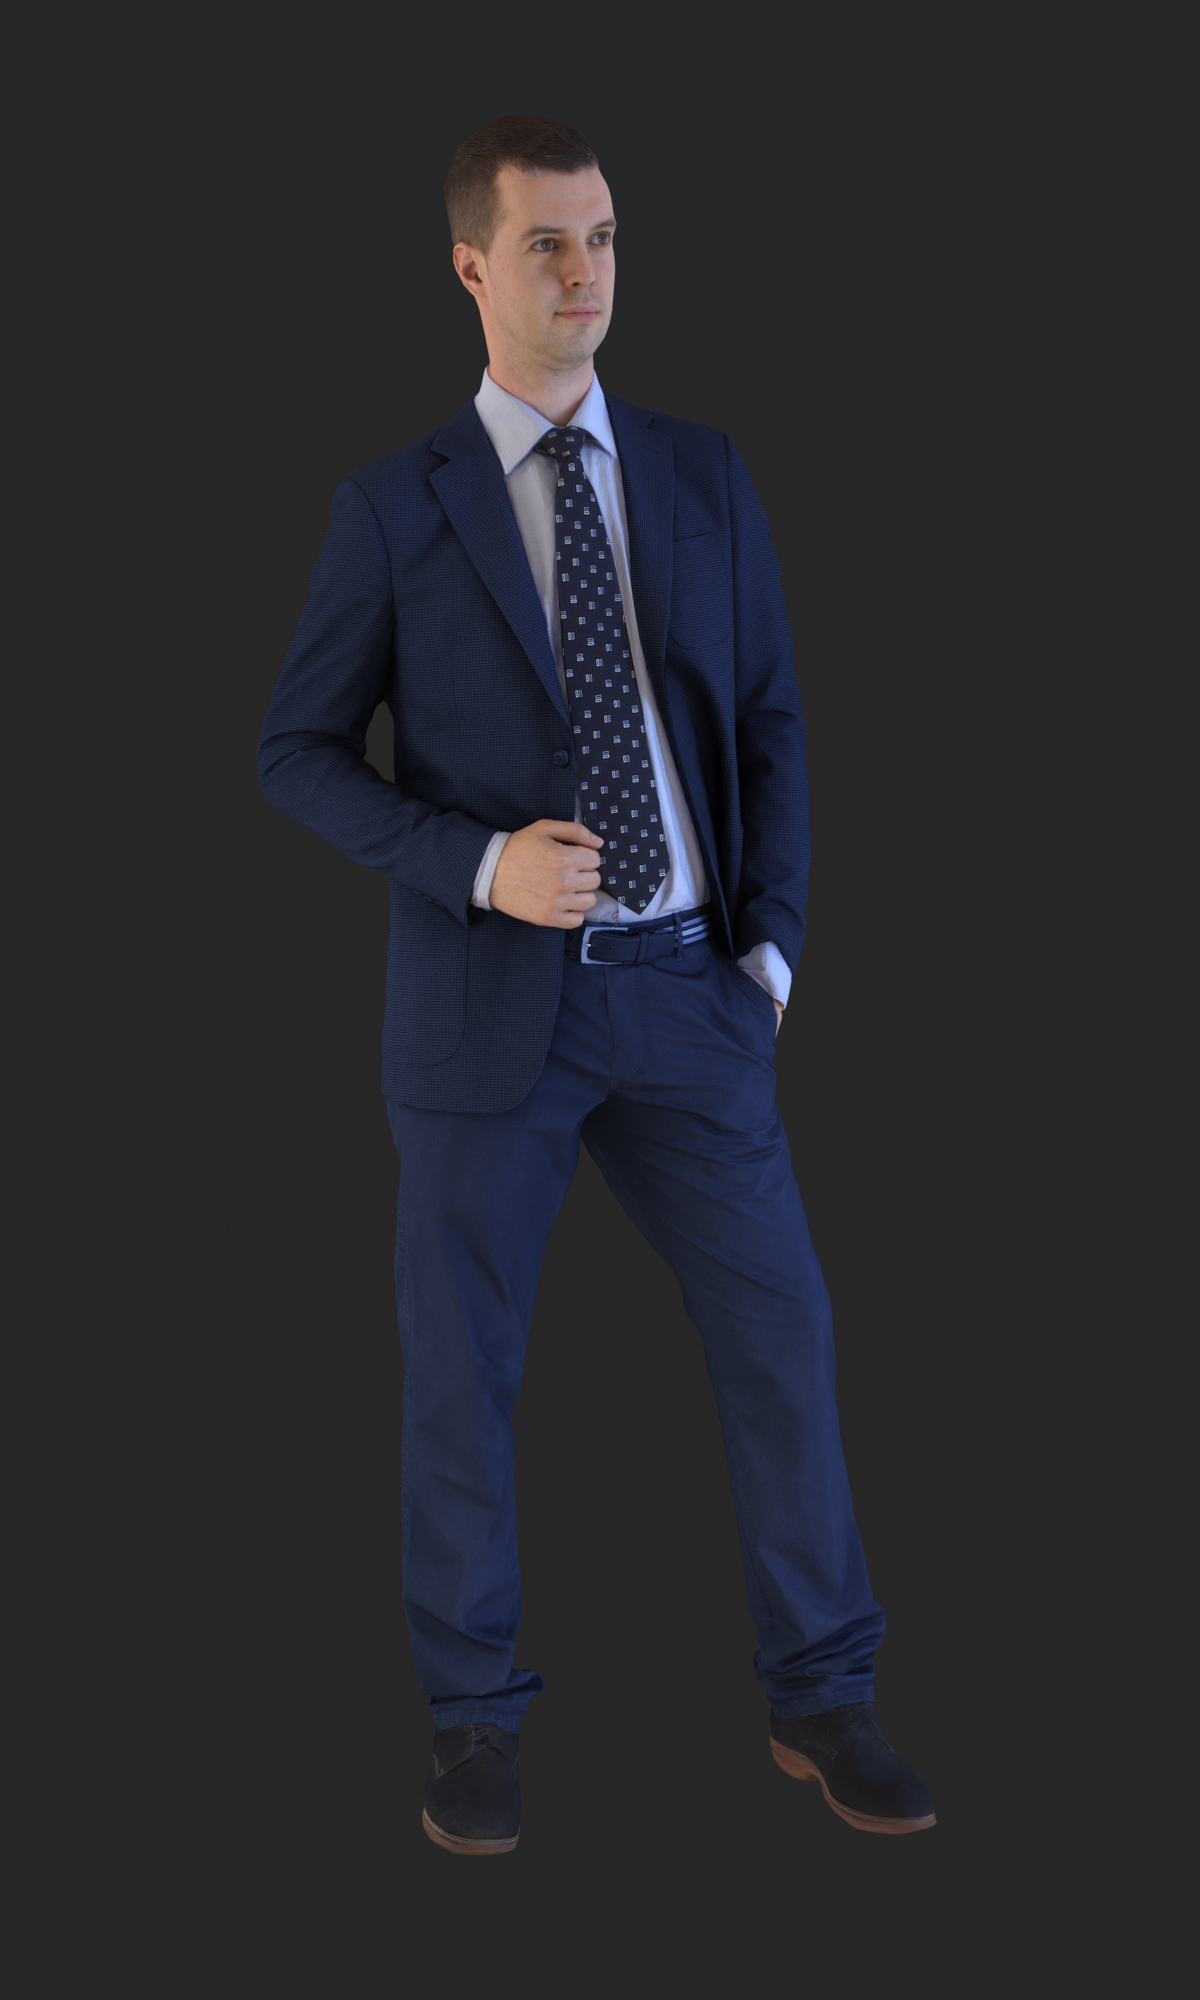 3DSKY FREE – HUMAN 3D – POSED PEOPLE – No.003